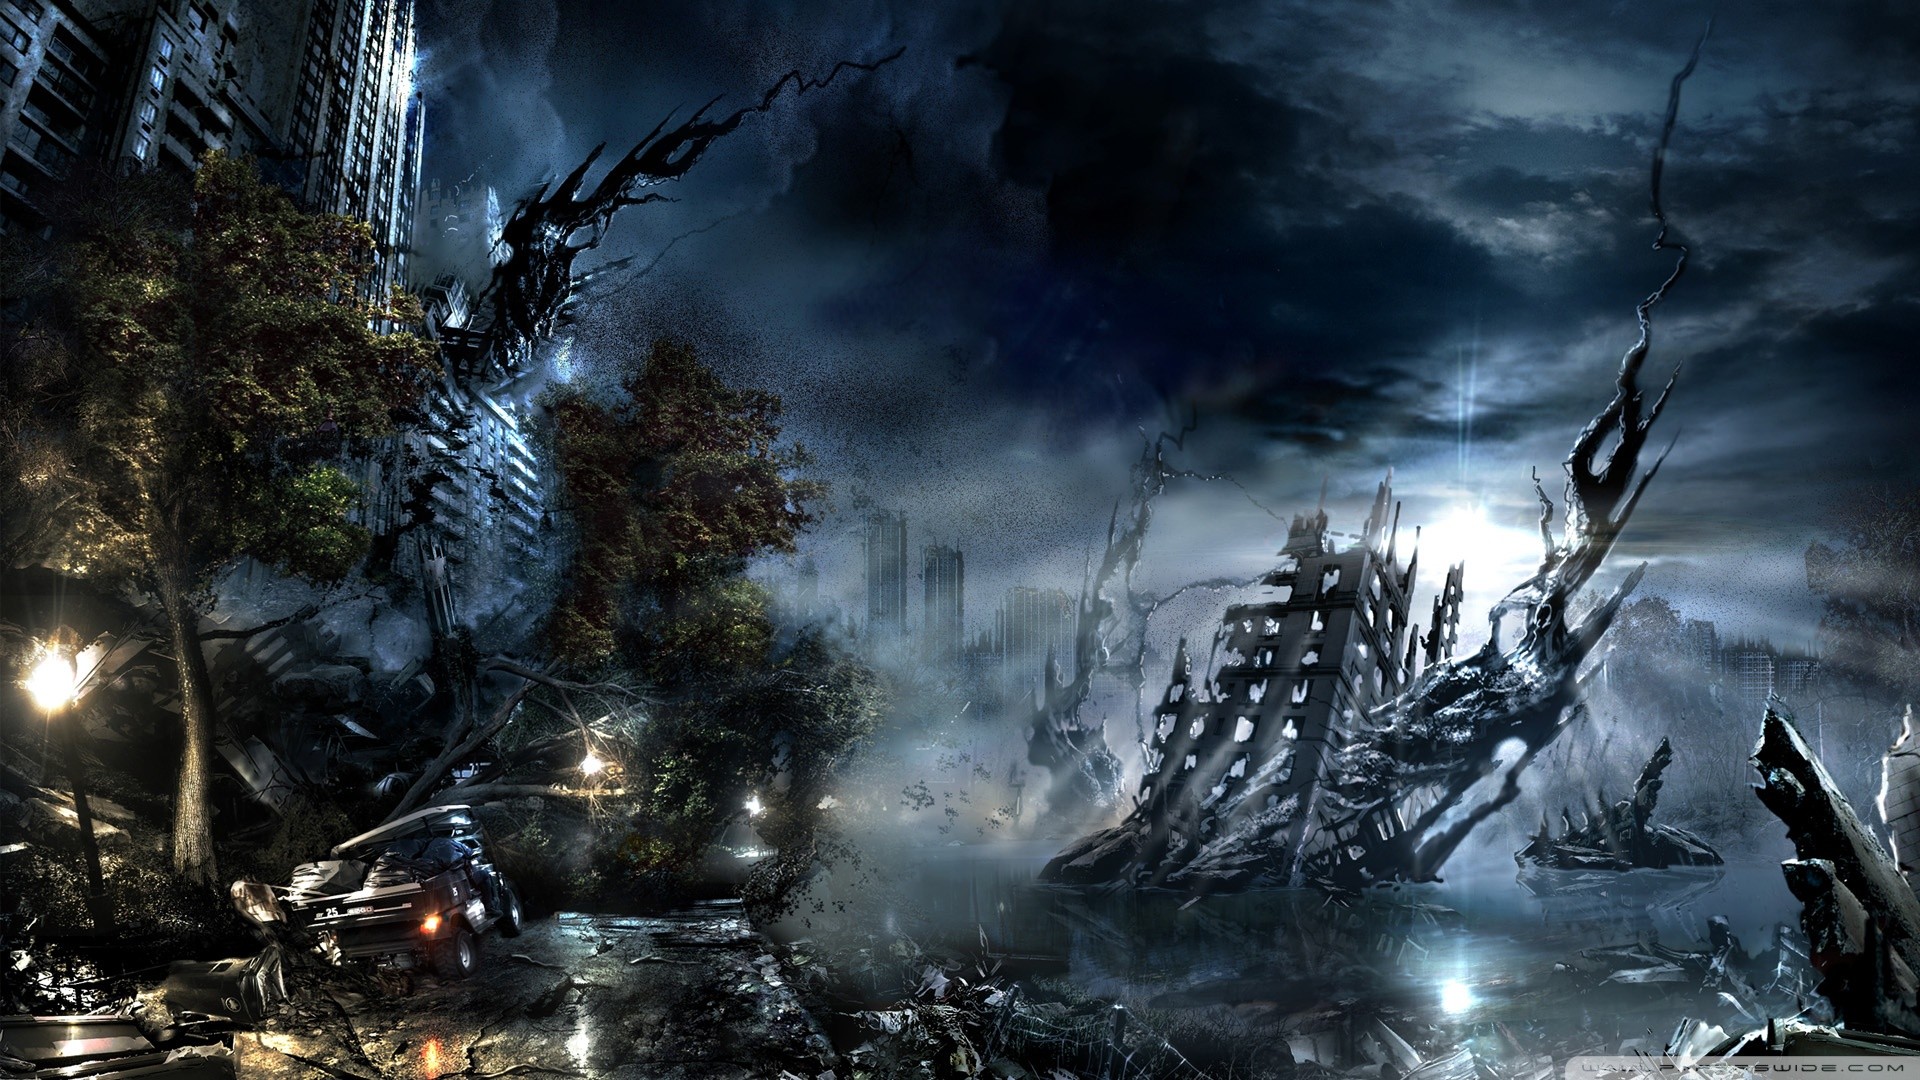 General 1920x1080 apocalyptic Chaos video games Alone in the Dark video game art horror